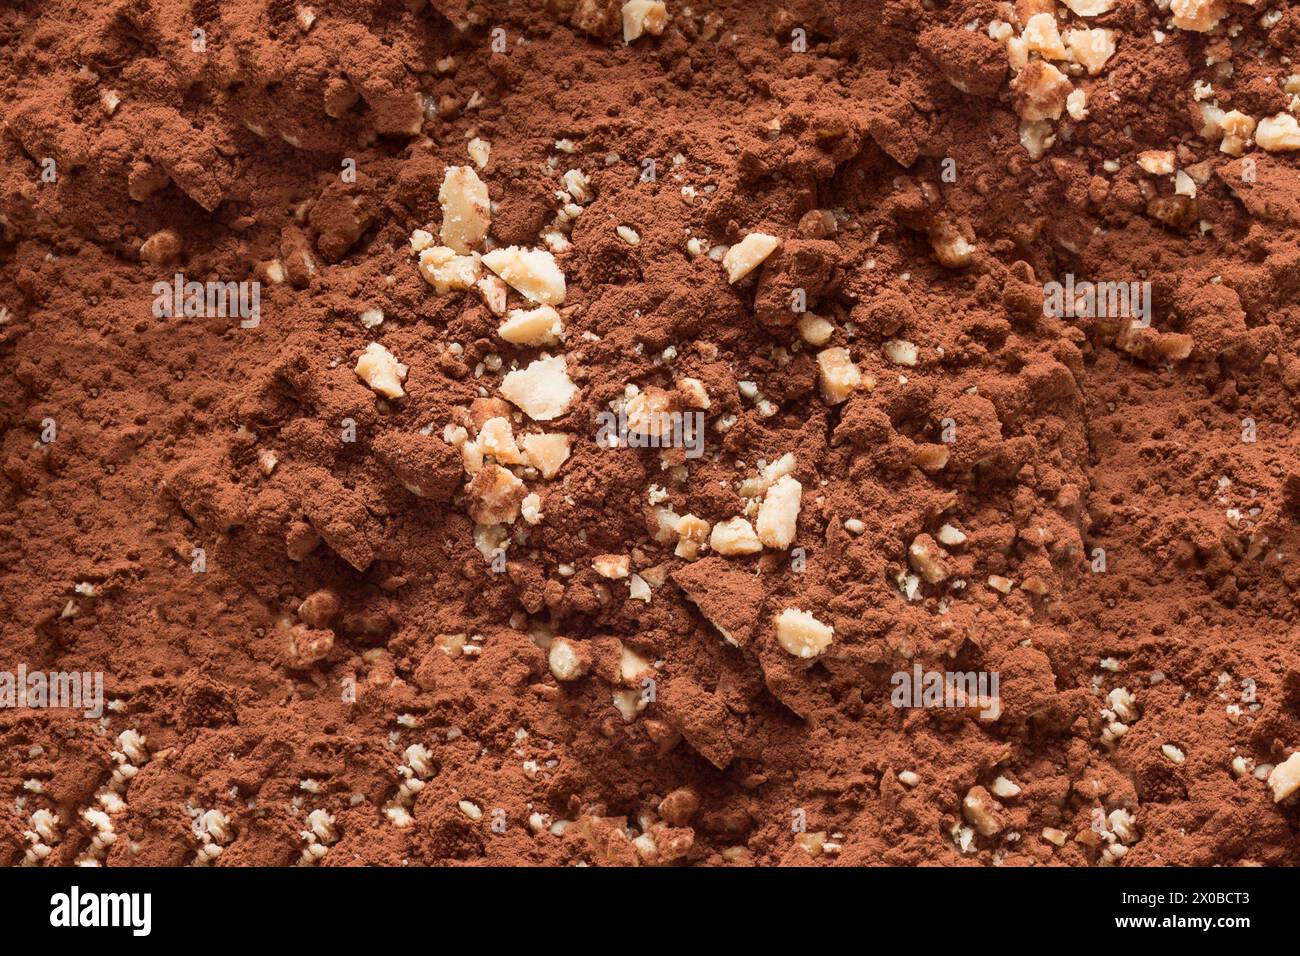 A textured landscape of finely ground cocoa powder adorned with crushed nuts.  The crushed nuts are light-colored and contrast well against the dark b Stock Photo